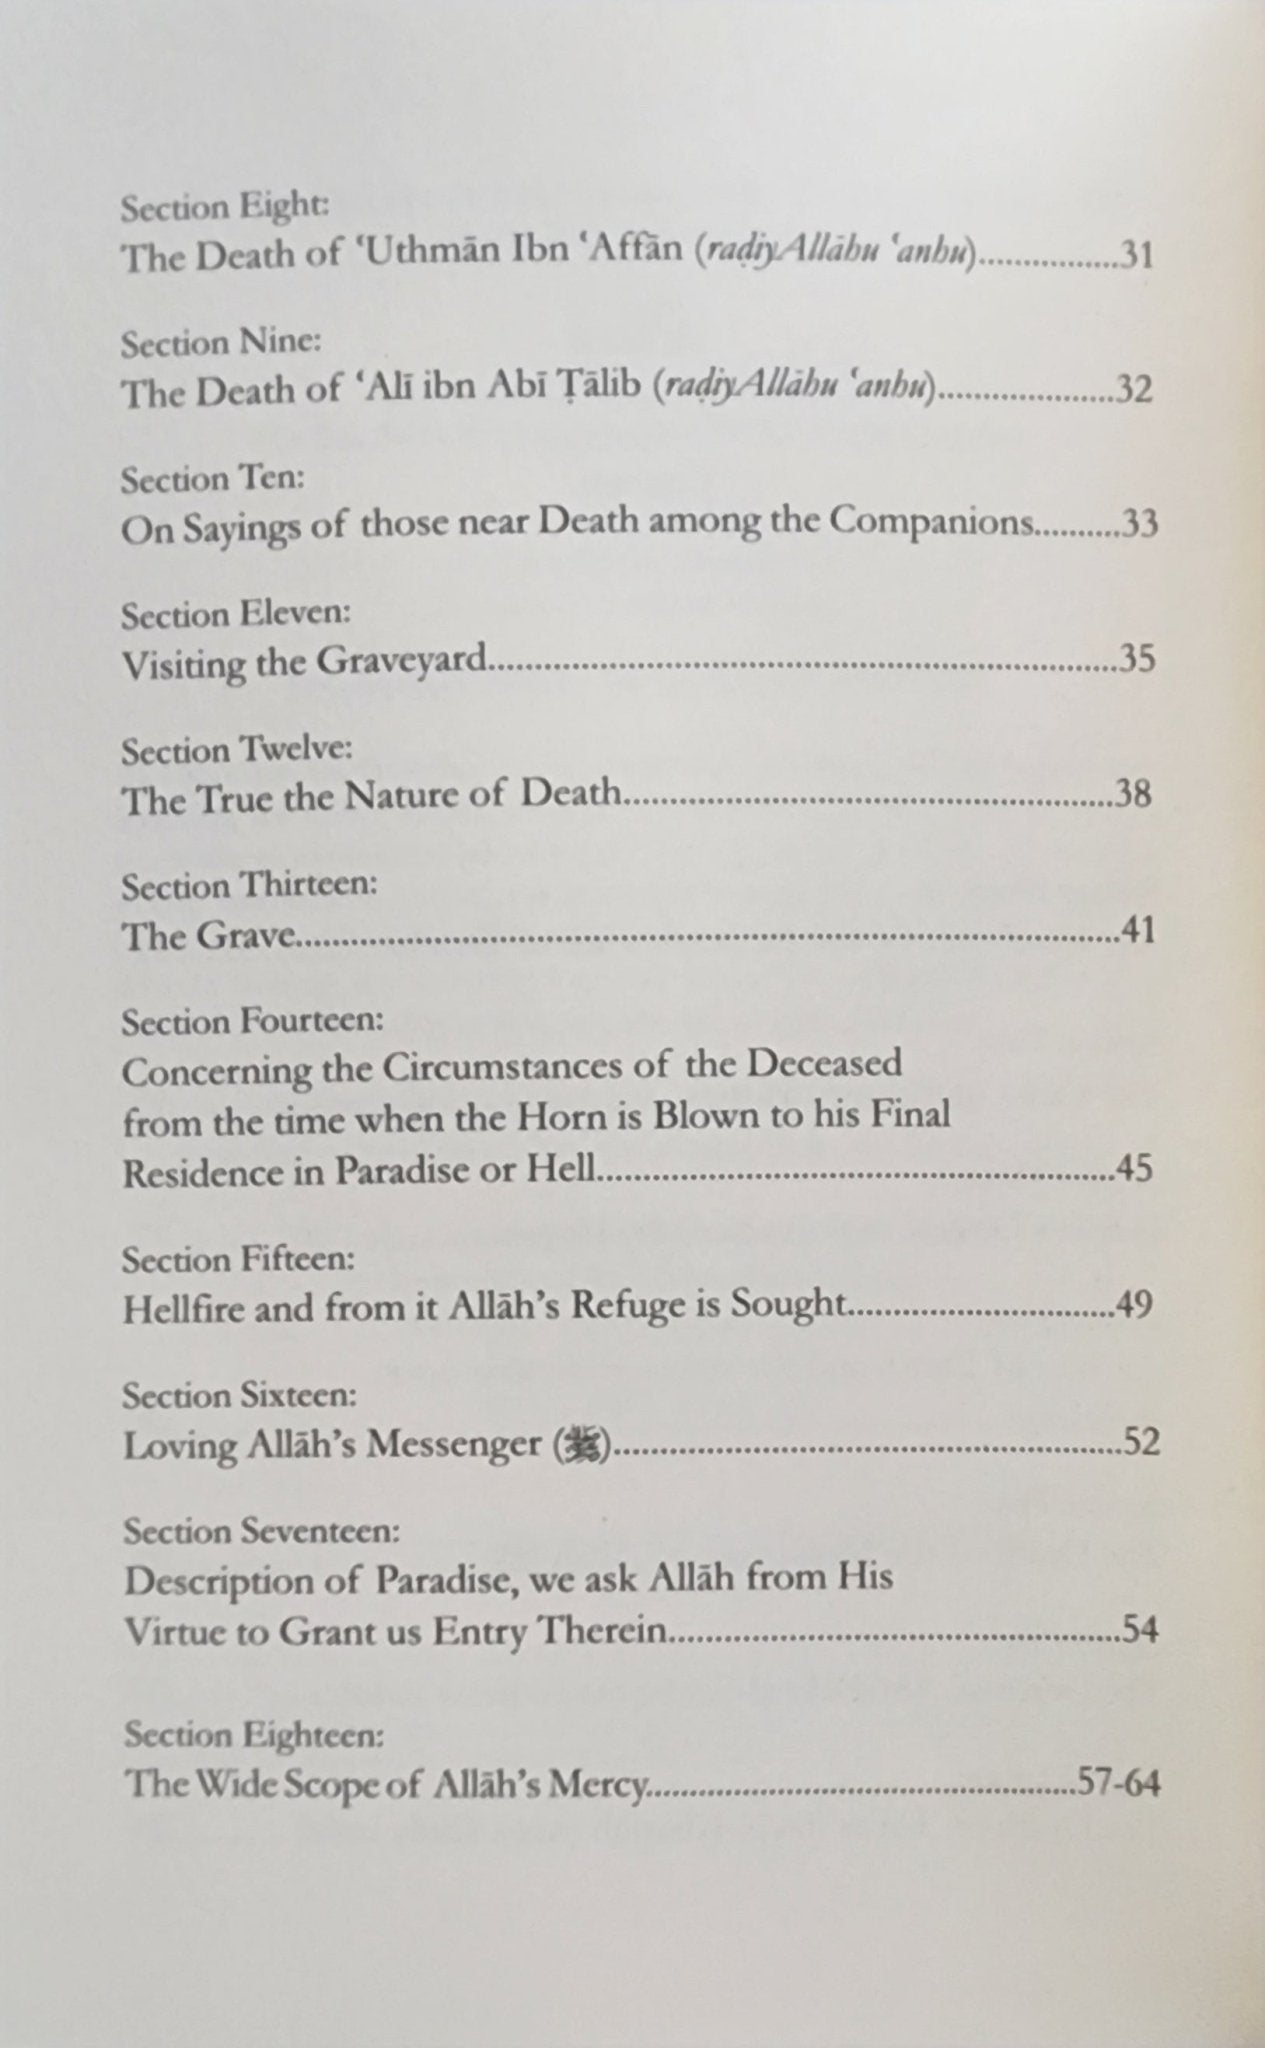 The Remembrance of Death And The Afterlife - The Islamic Book Cafe LLC